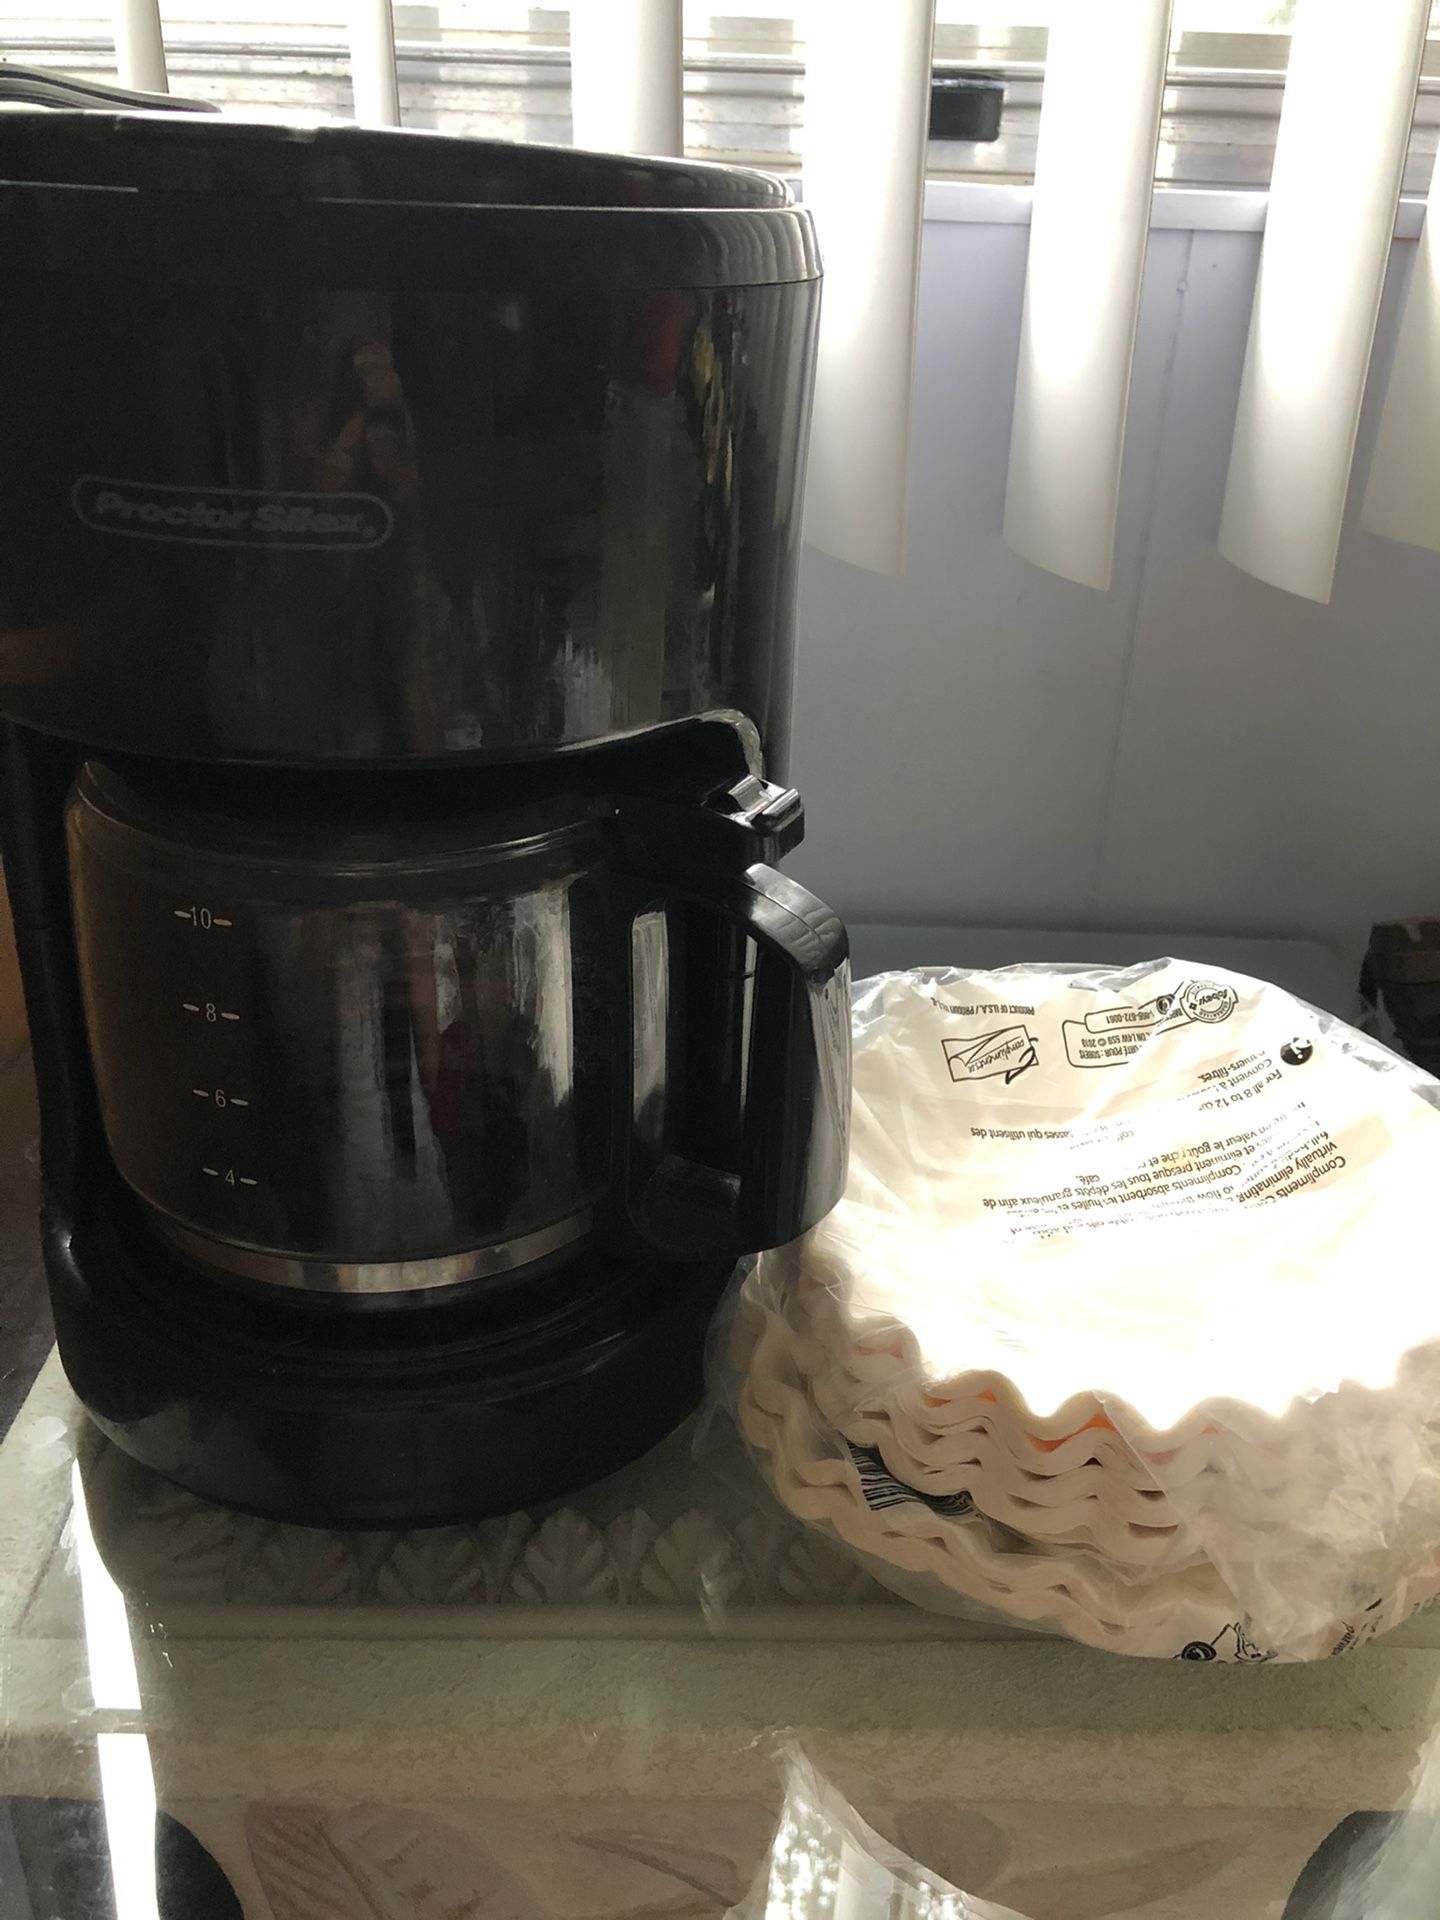 10 cup coffee maker with coffee filters